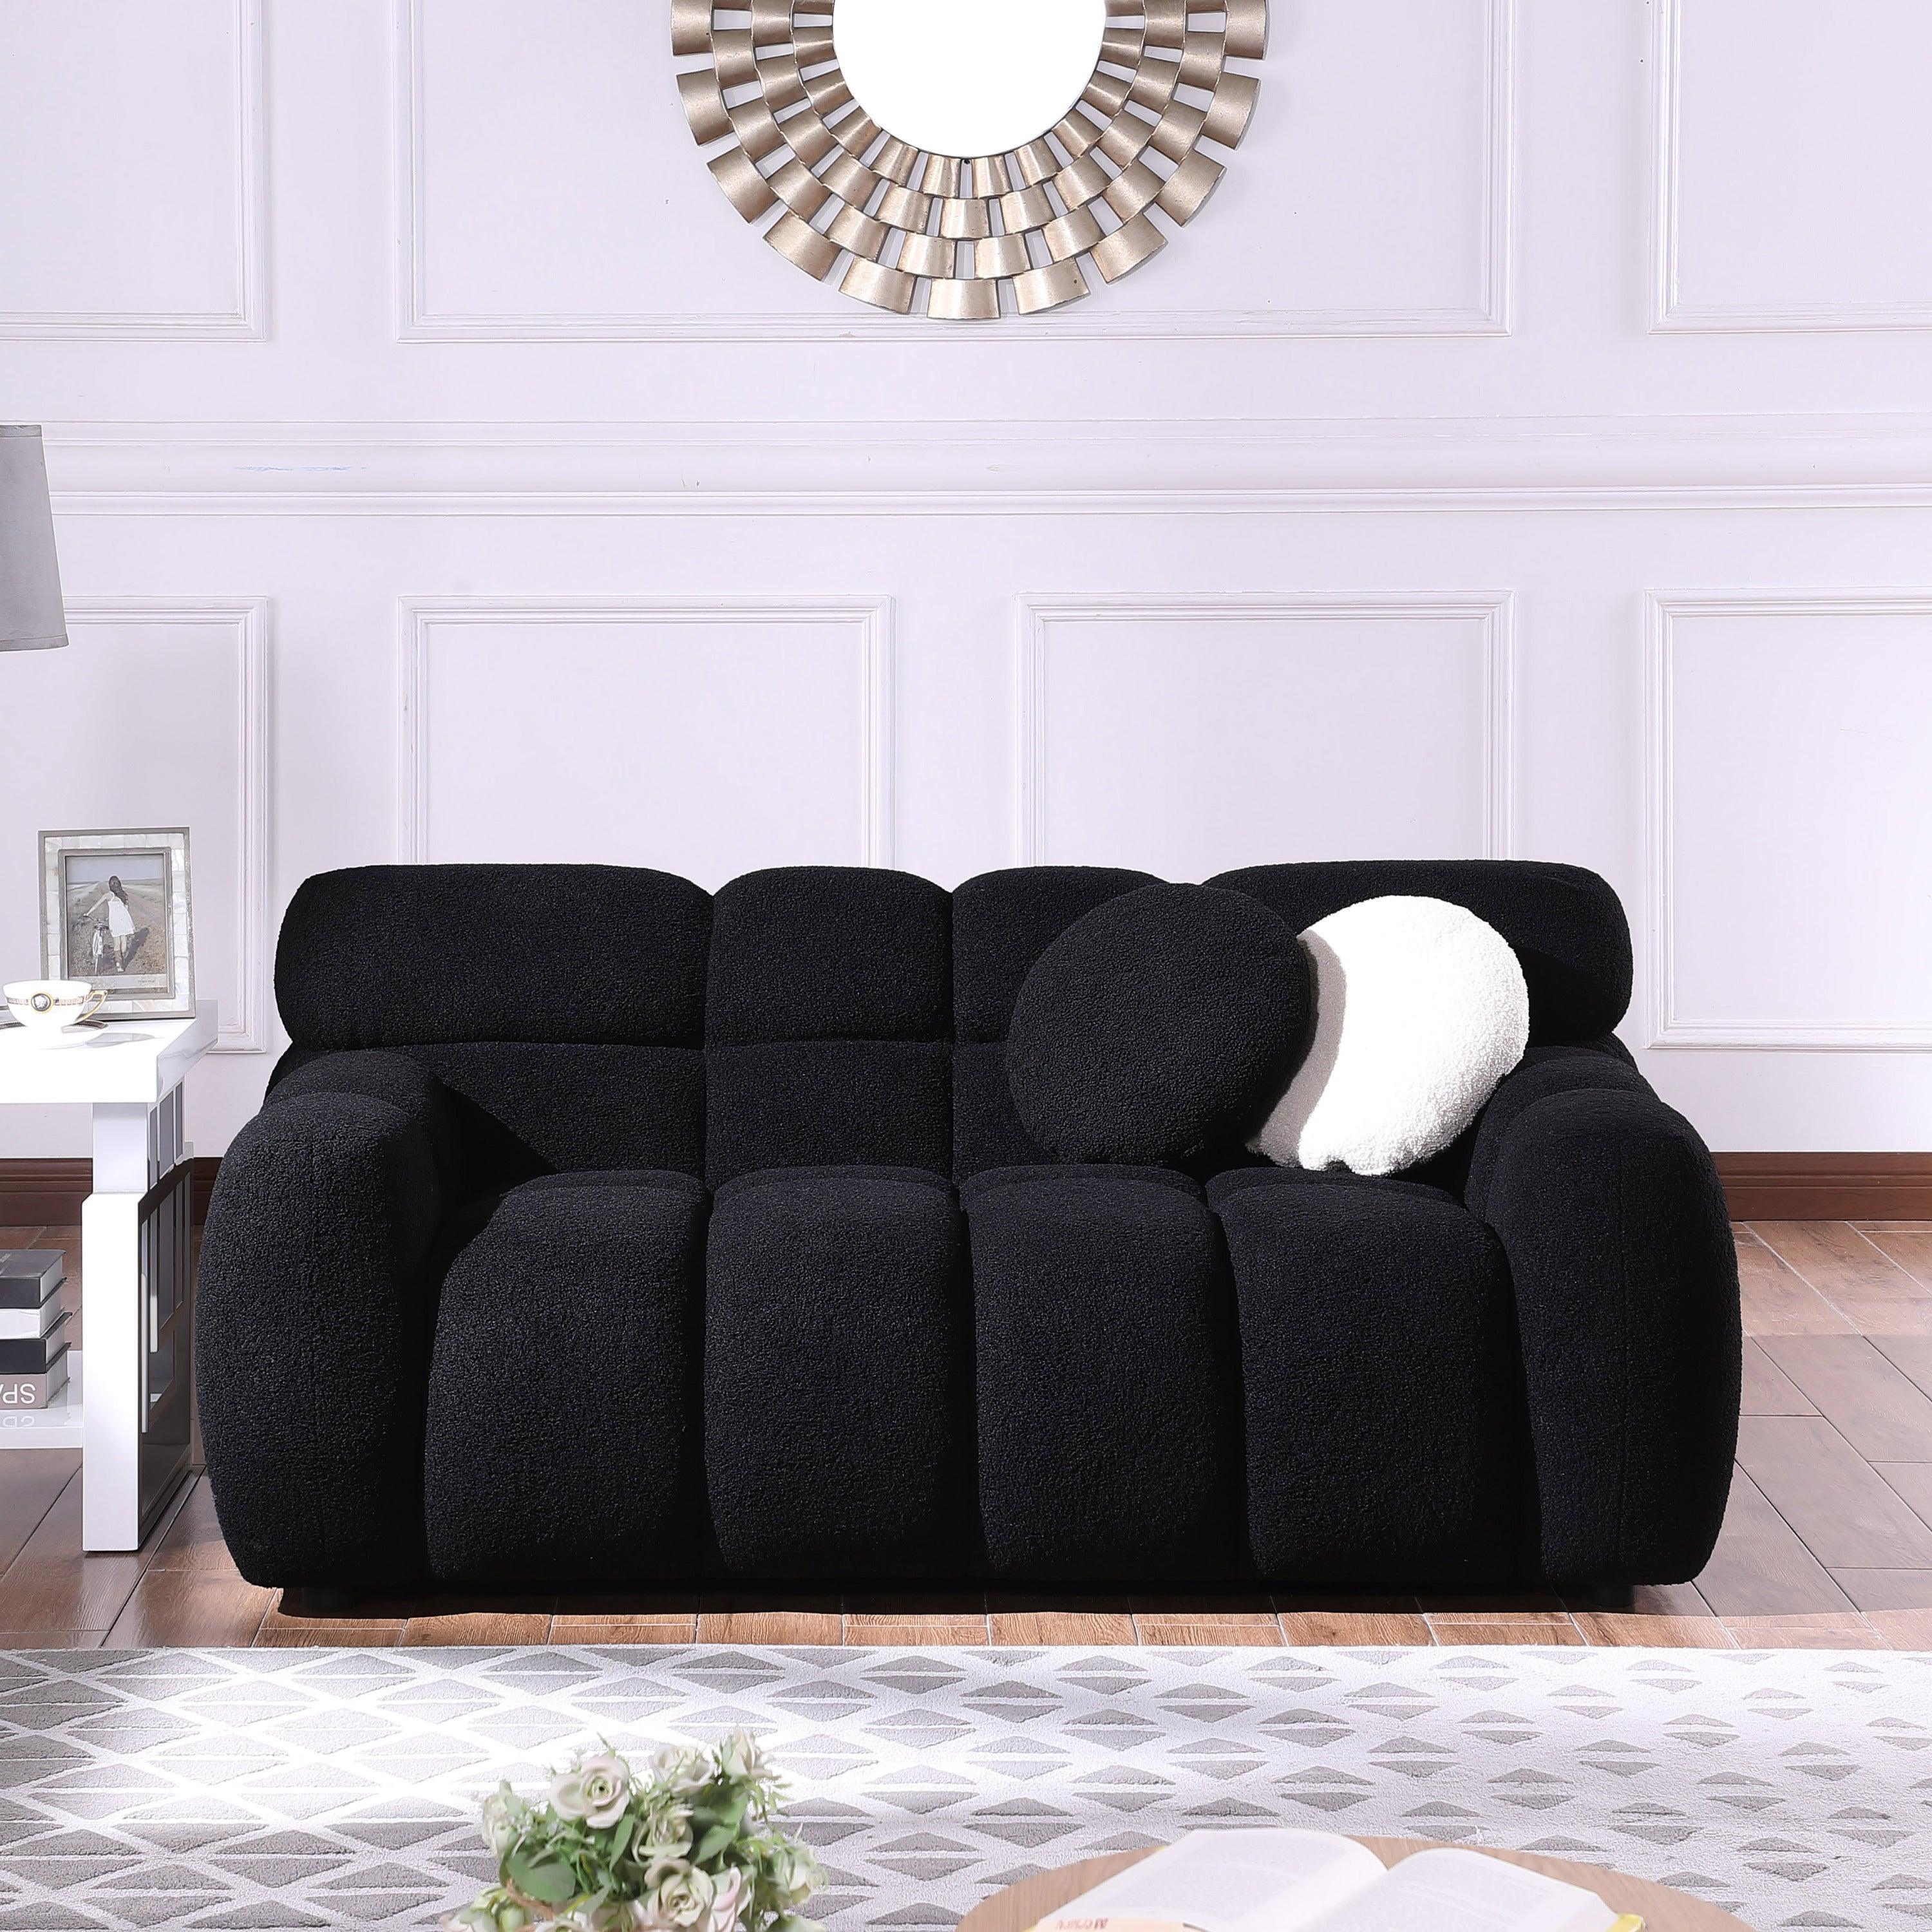 🆓🚛 64.96 Length, 35.83" Deepth, Human Body Structure for Usa People, Marshmallow Sofa, Boucle Sofa, 2 Seater, Black